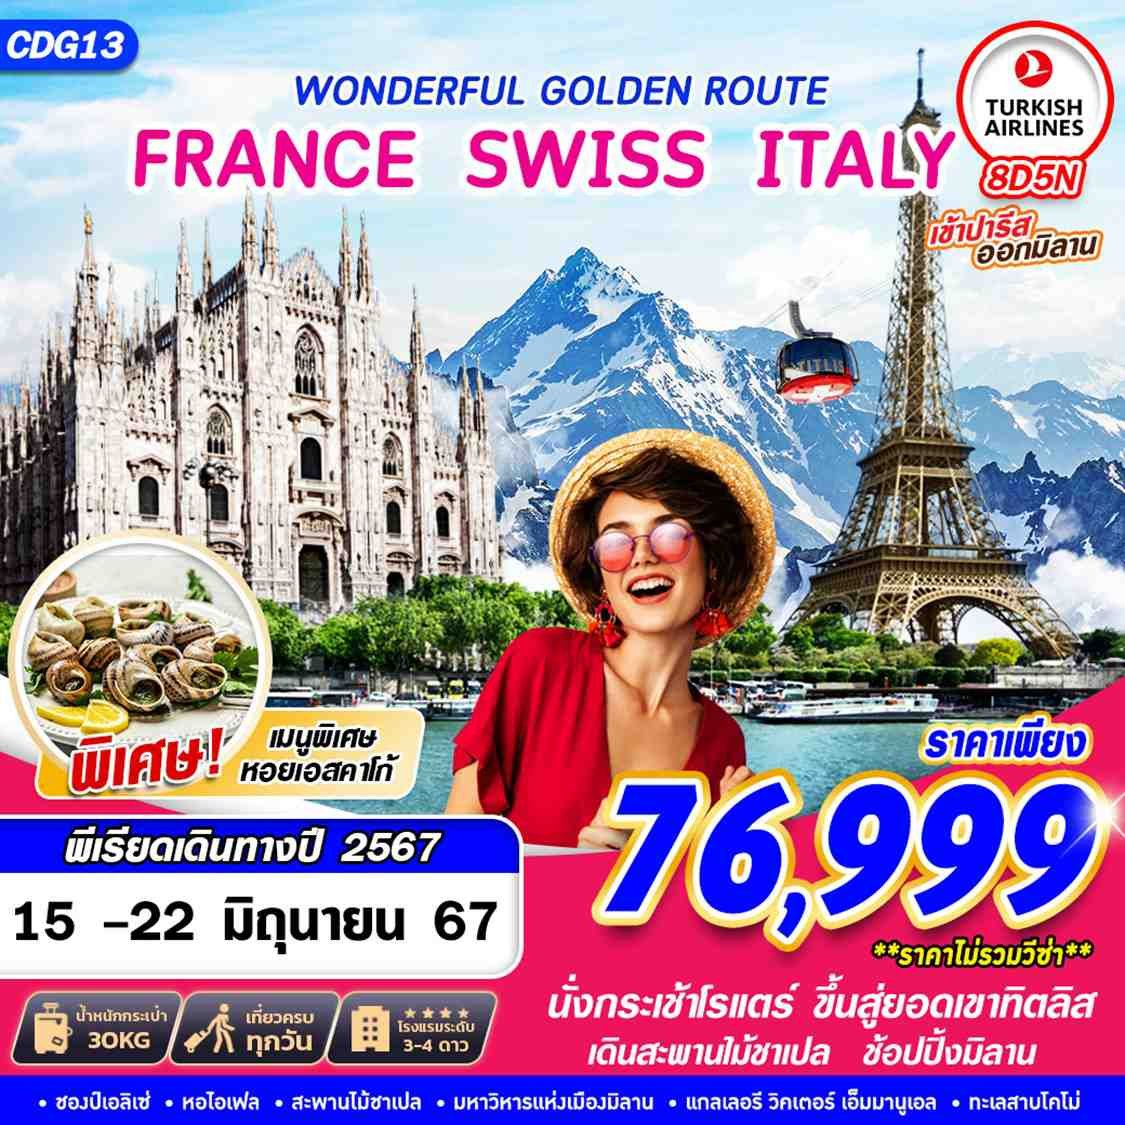 CDG13  WONDERFUL GOLDEN ROUTE FRANCE SWISS ITALY  8D5N BY TK